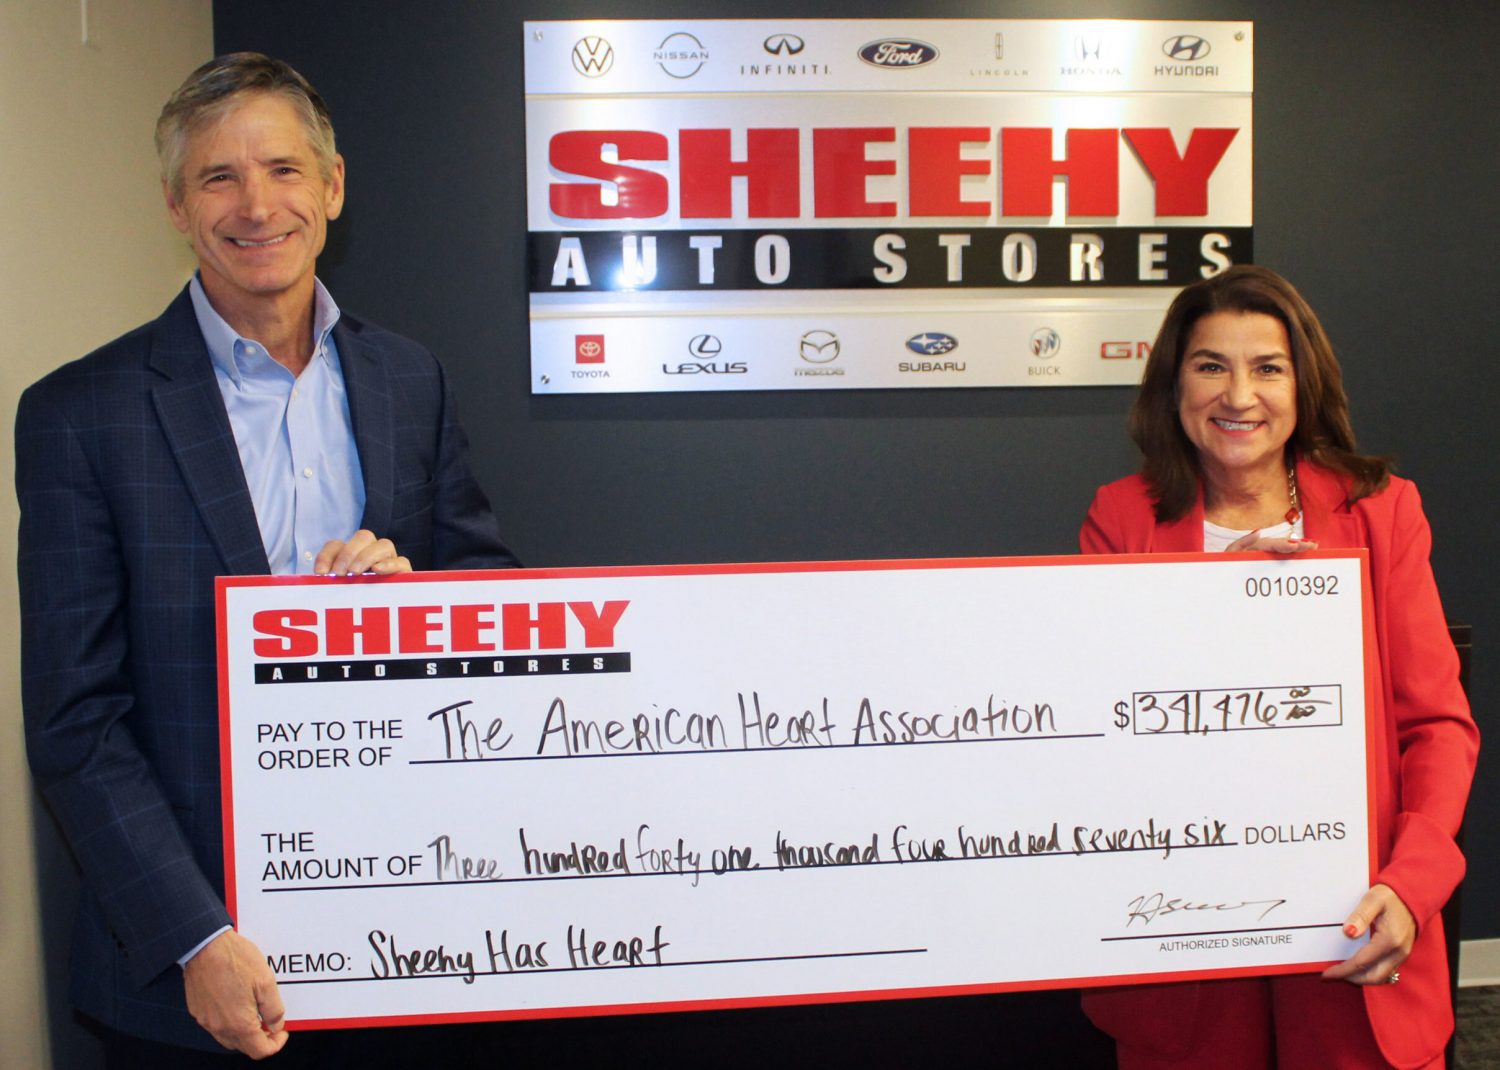 Sheehy Auto Stores has raised more than $340,000 for the American Heart Association in 2023, continuing its 11-year partnership.